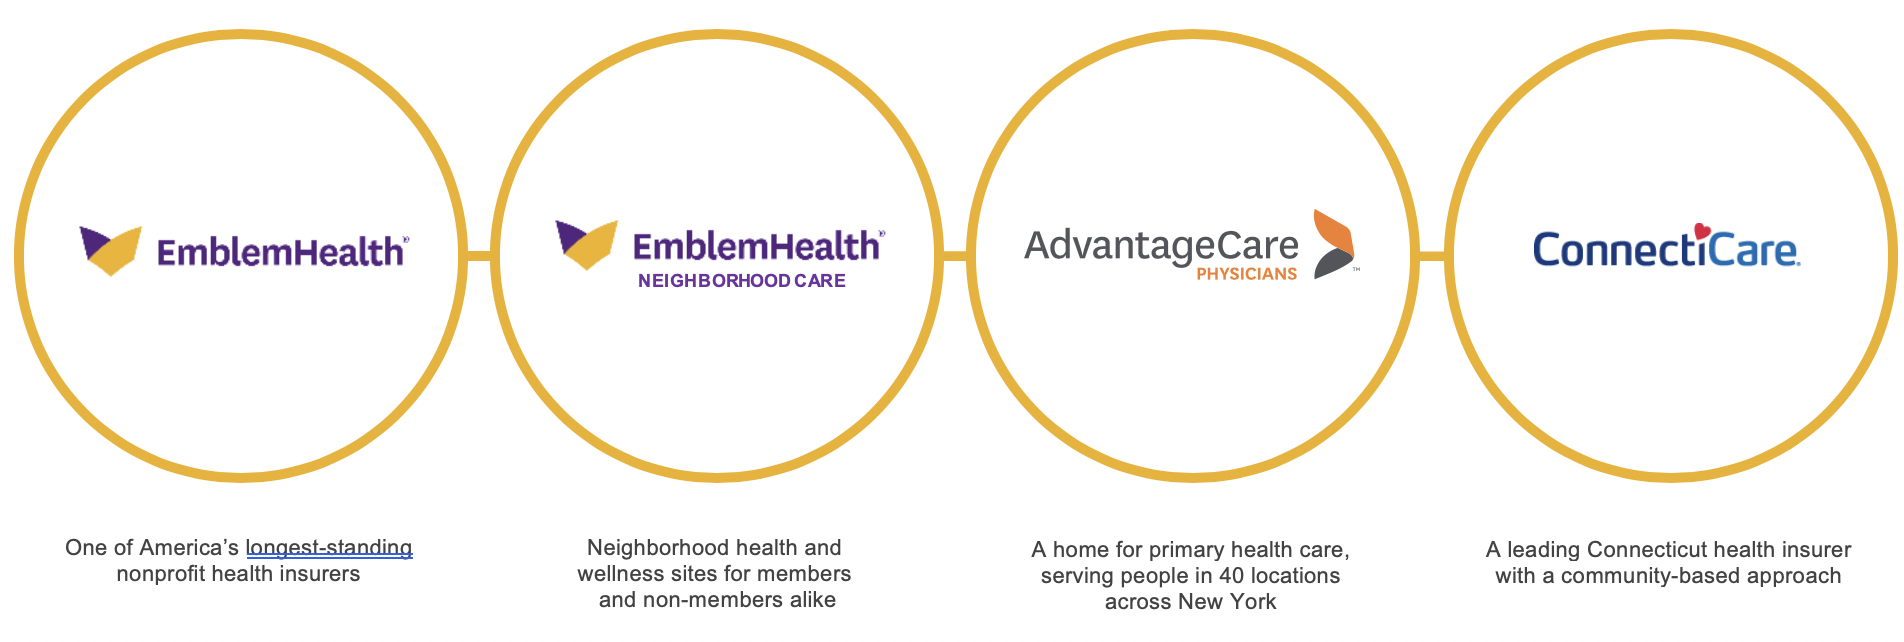 Emblemhealth path programs conduent business operations denver